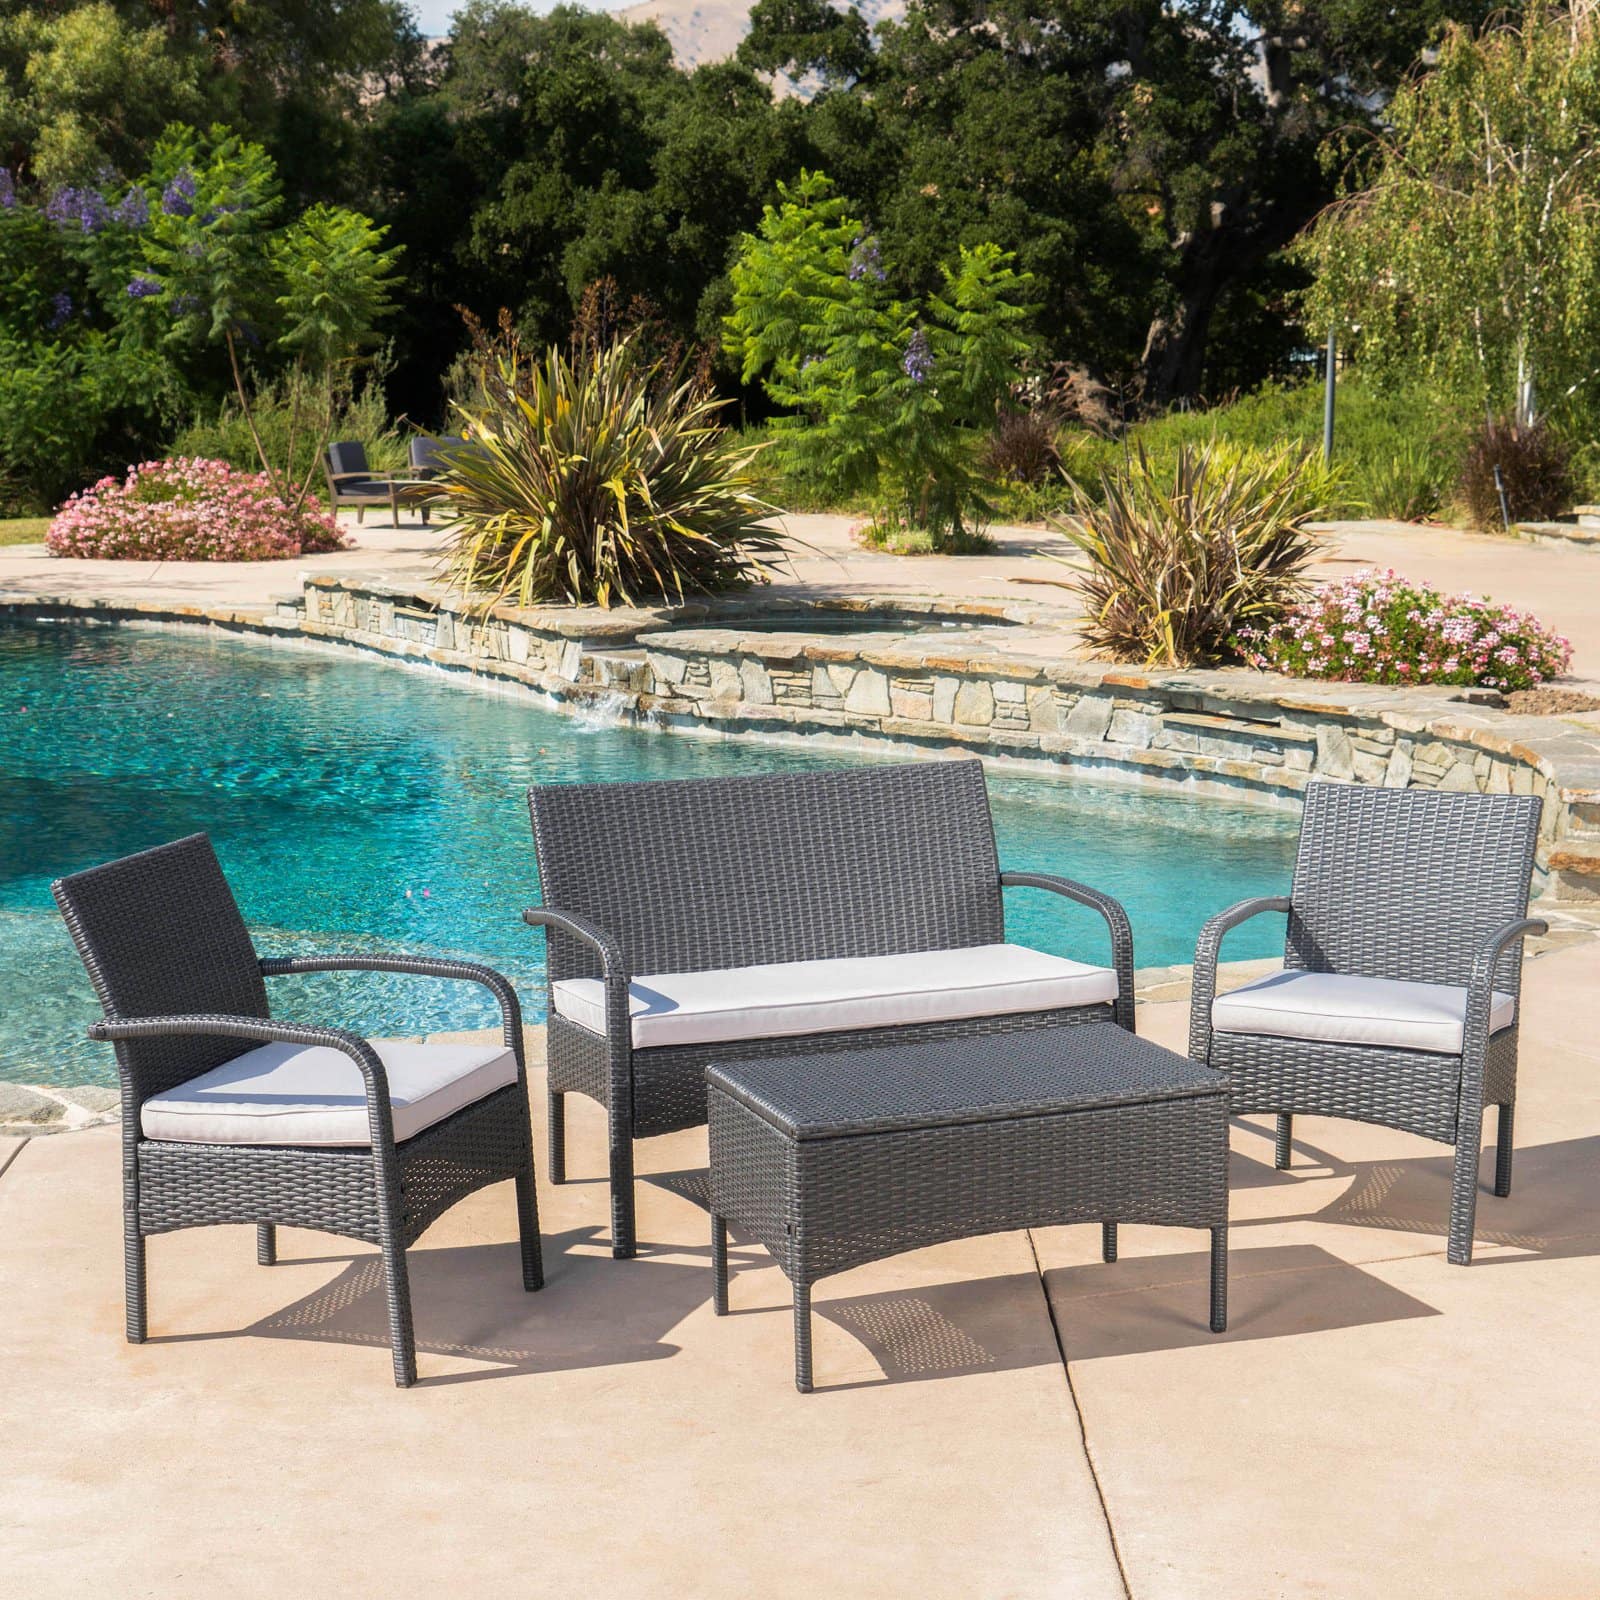 Christopher Knight Home Cordoba Outdoor Wicker 4-piece Conversation Set with Cushions by  Gray + Light Gray - image 3 of 11